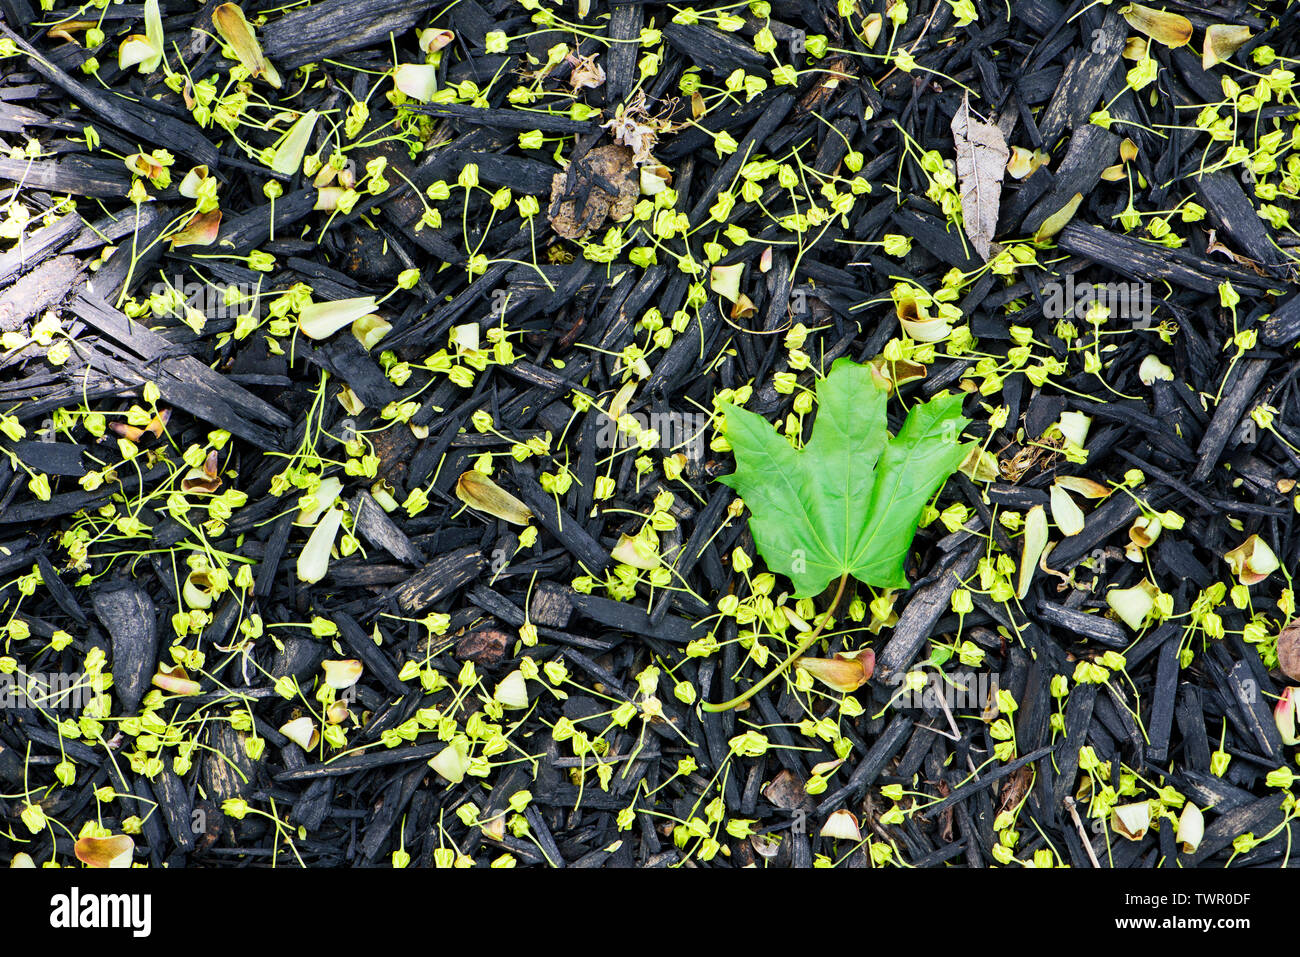 Norway maple (acer platanoides) female flowers and single leaf on black mulch. Stock Photo